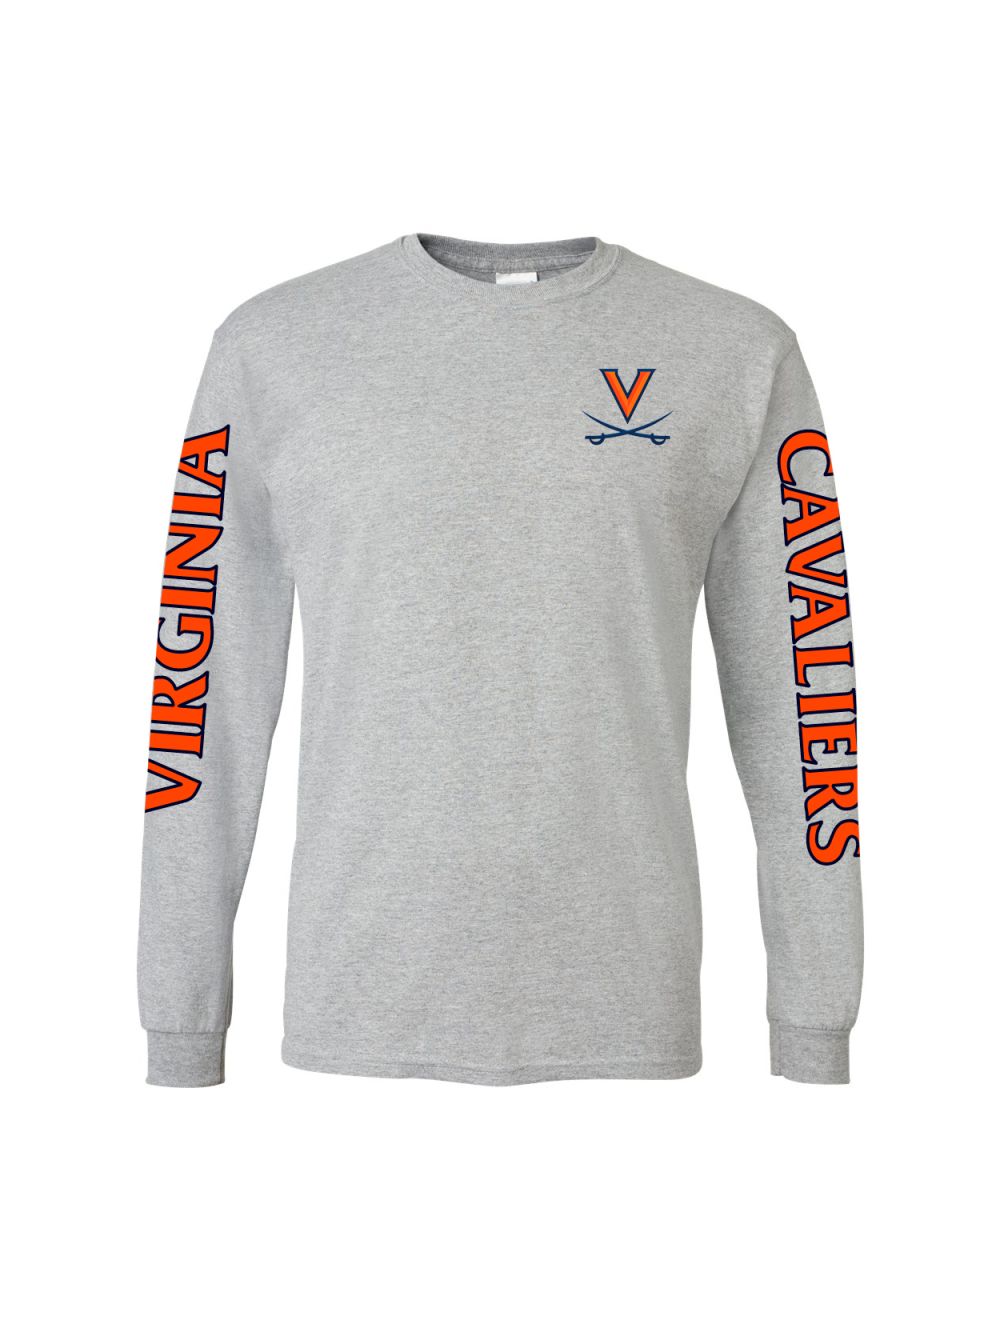 Vintage Virginia Cavaliers Shirt Size Small – Yesterday's Attic